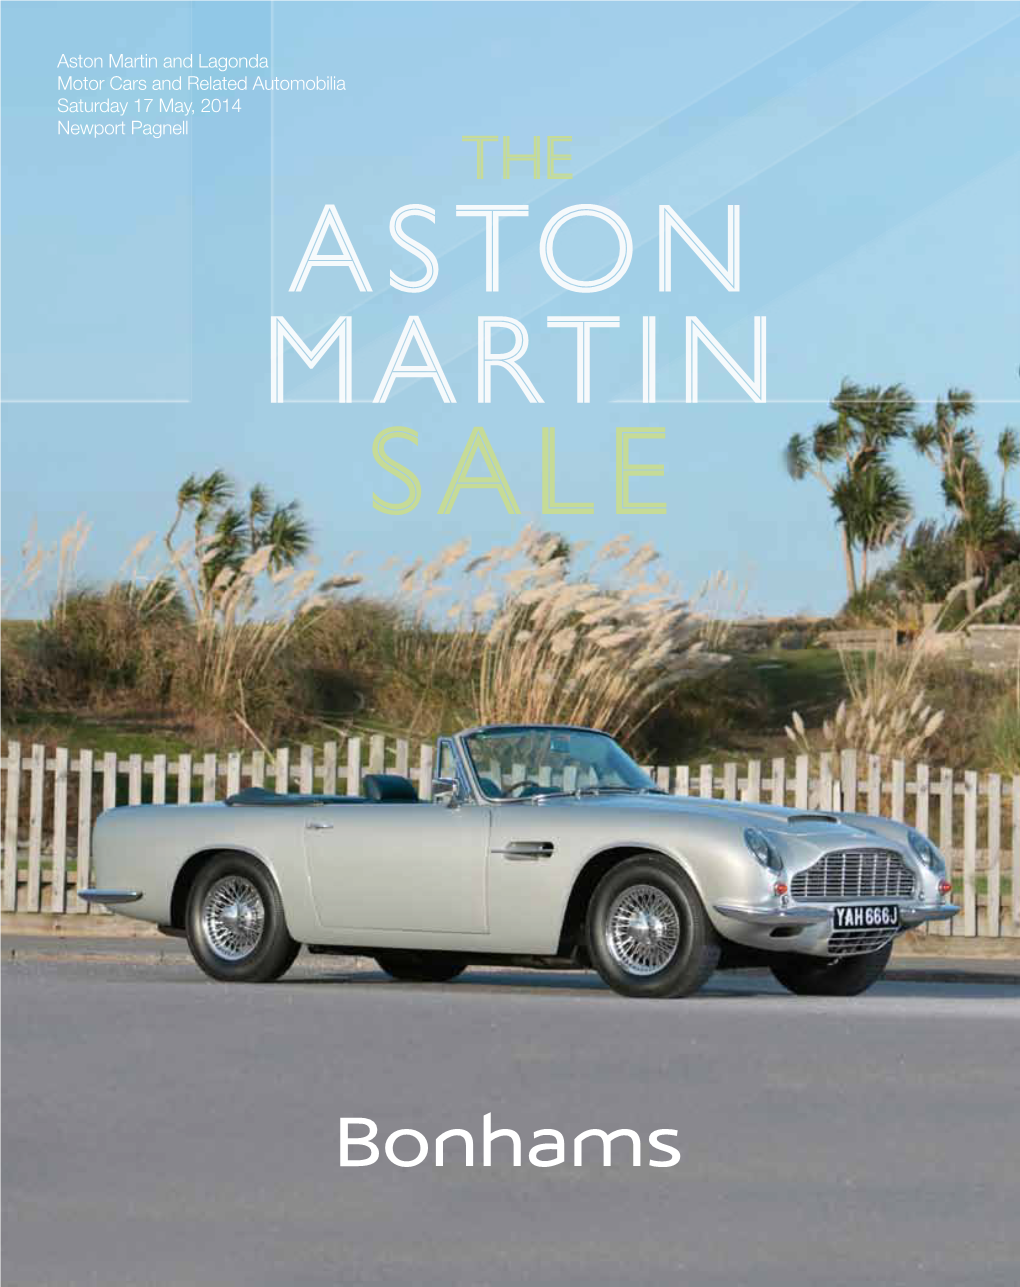 Aston Martin and Lagonda Motor Cars and Related Automobilia Saturday 17 May, 2014 Newport Pagnell ONE THING MATCHES OUR PASSION for ASTON MARTIN ...YOURS